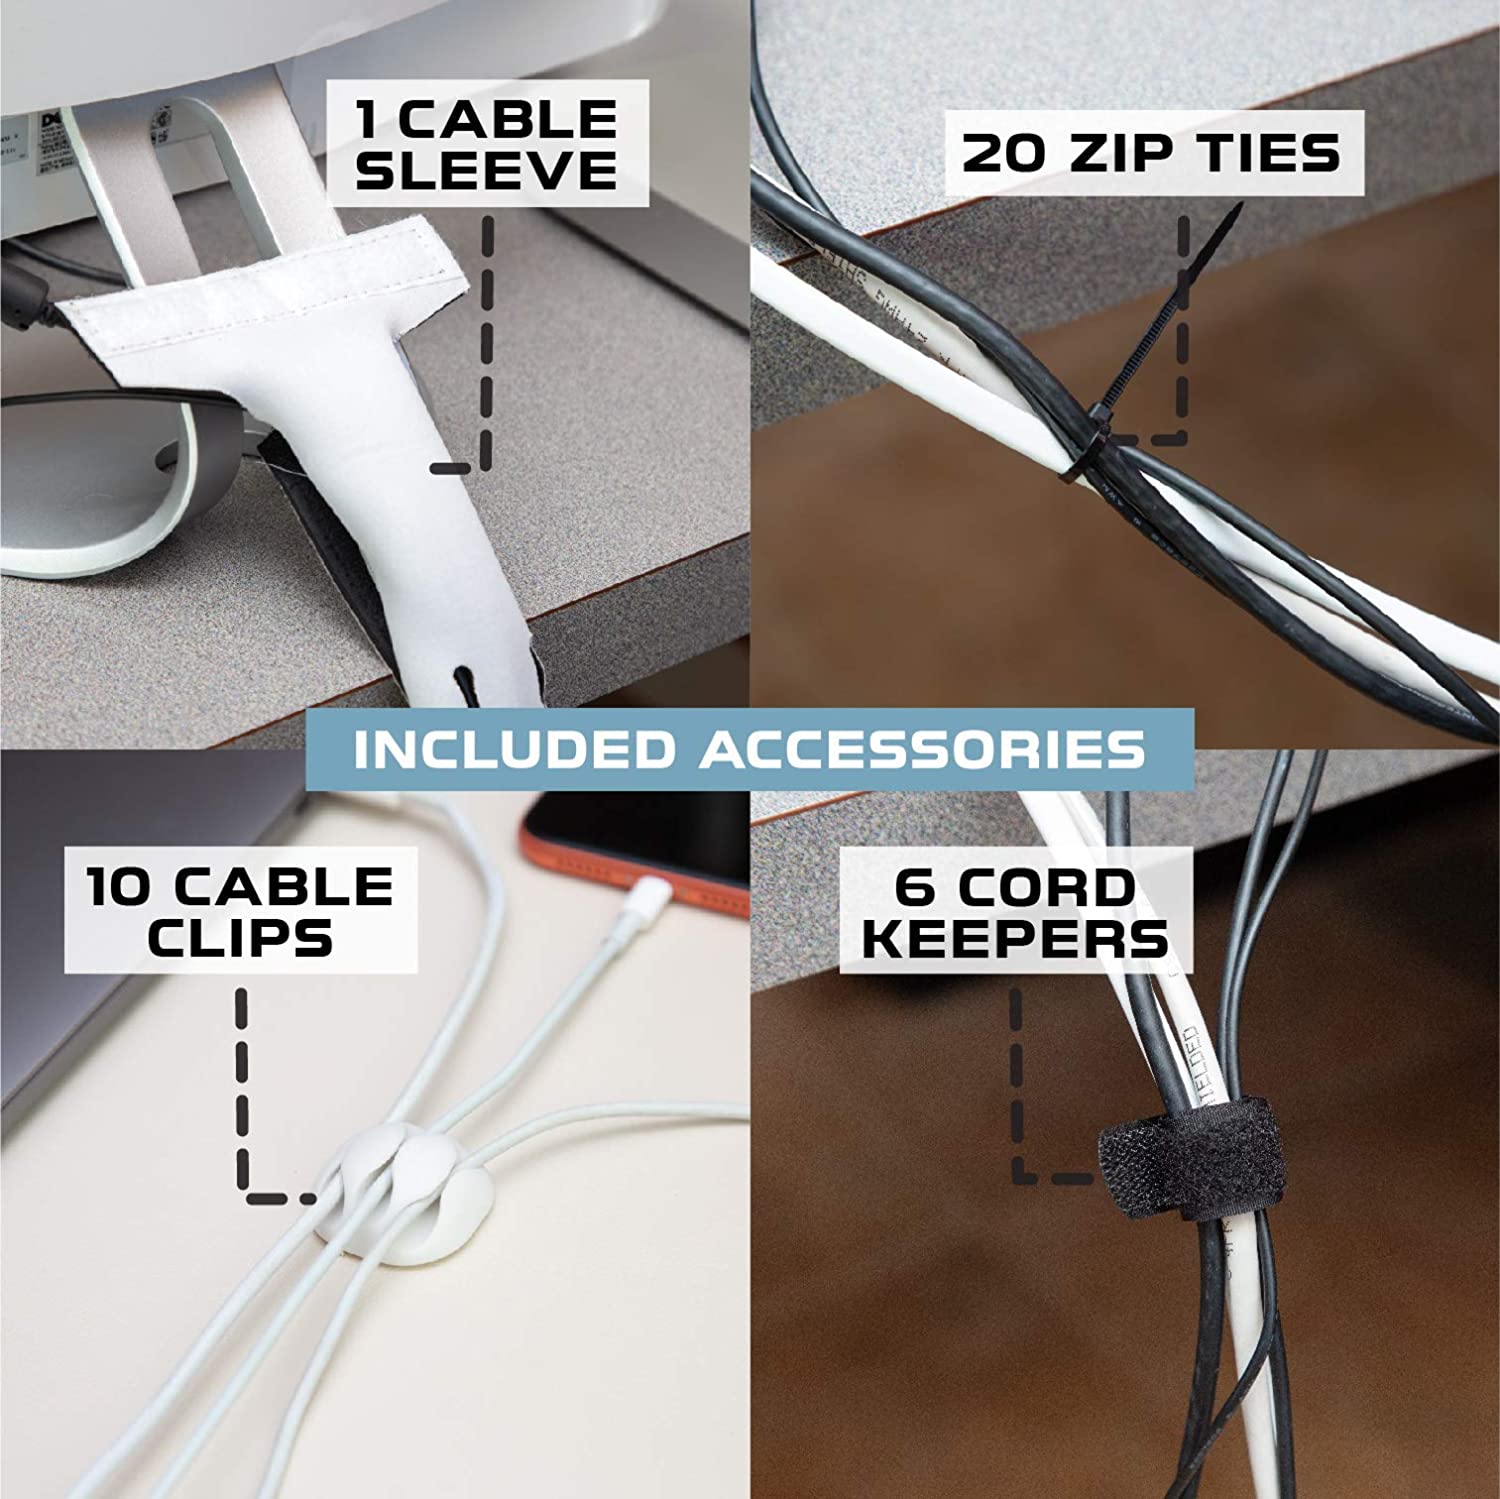 DIY Zipper Cable Sleeve Nylon Wire Cable Management Organizer